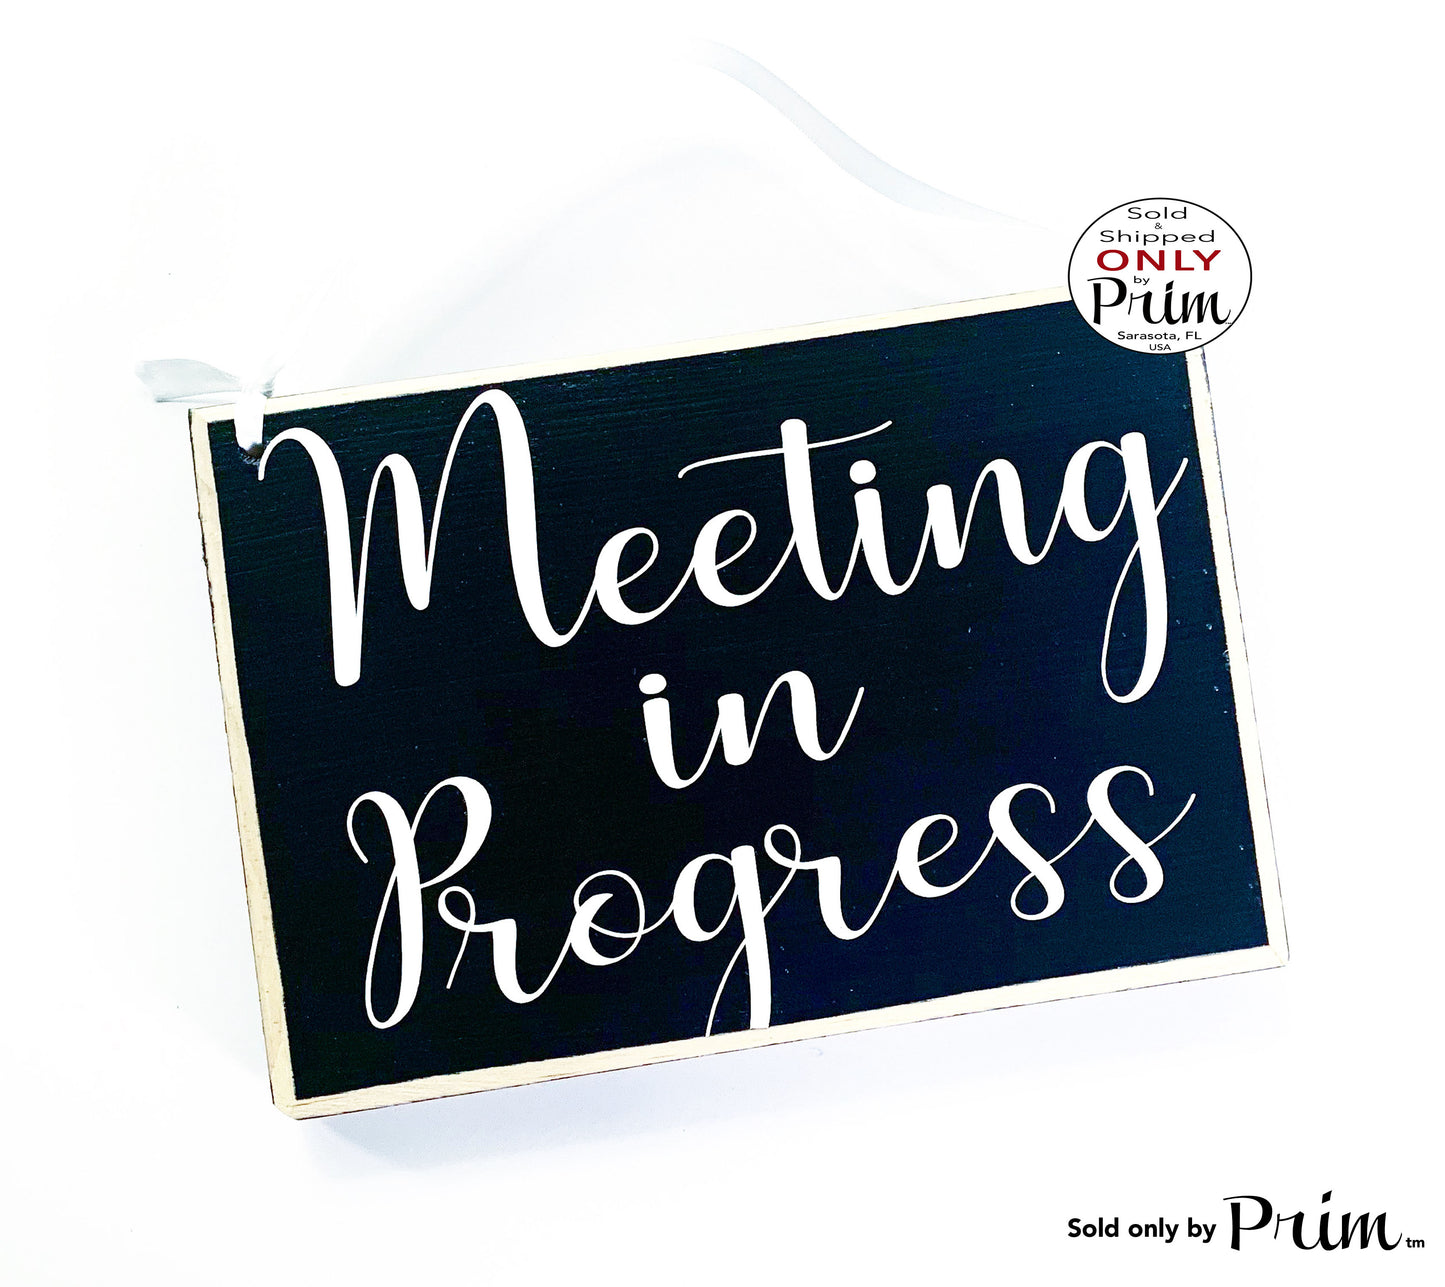 Designs by Prim Custom Wood Meeting Sign Social Media Instagram Facebook Follow Us8x6 Meeting In Progress Custom Wood Sign In Session Please Do Not Disturb Business Office Conference Do Not Enter Busy Corporate Door Plaque Designs by Prim